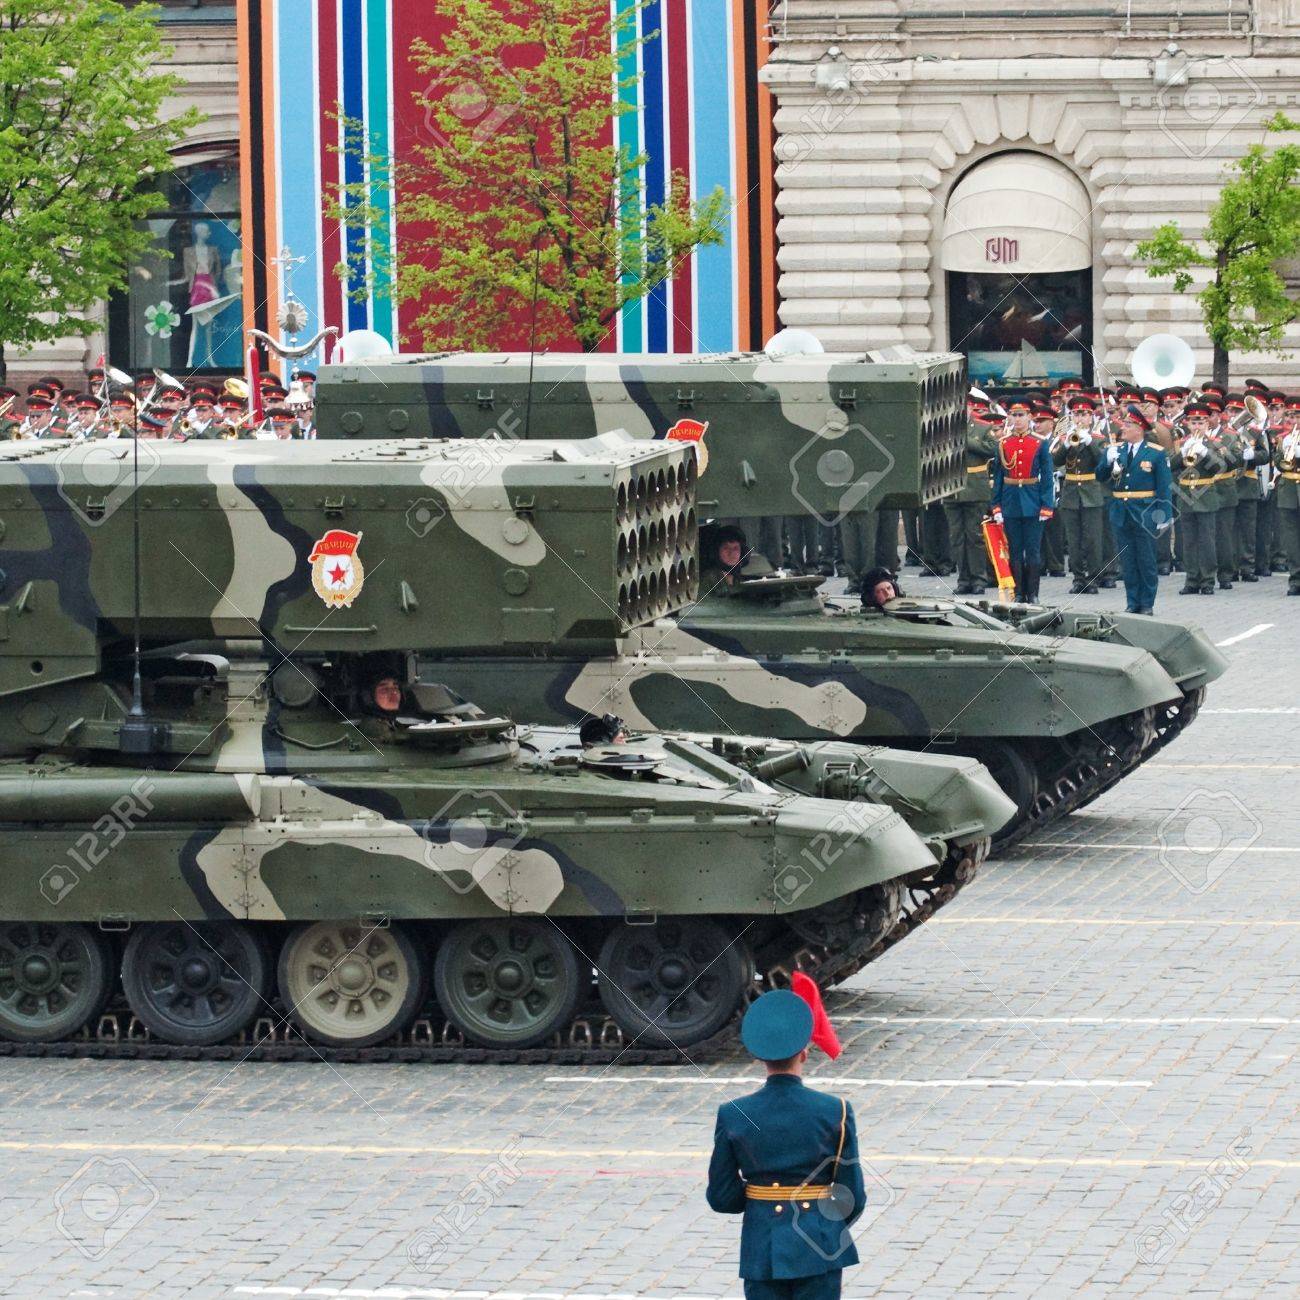 6961734-TOS-1-Heavy-Flame-Thrower-System-Dress-rehearsal-of-Military-Parade-on-65th-anniversary-of-Victory-i-Stock-Photo.jpg